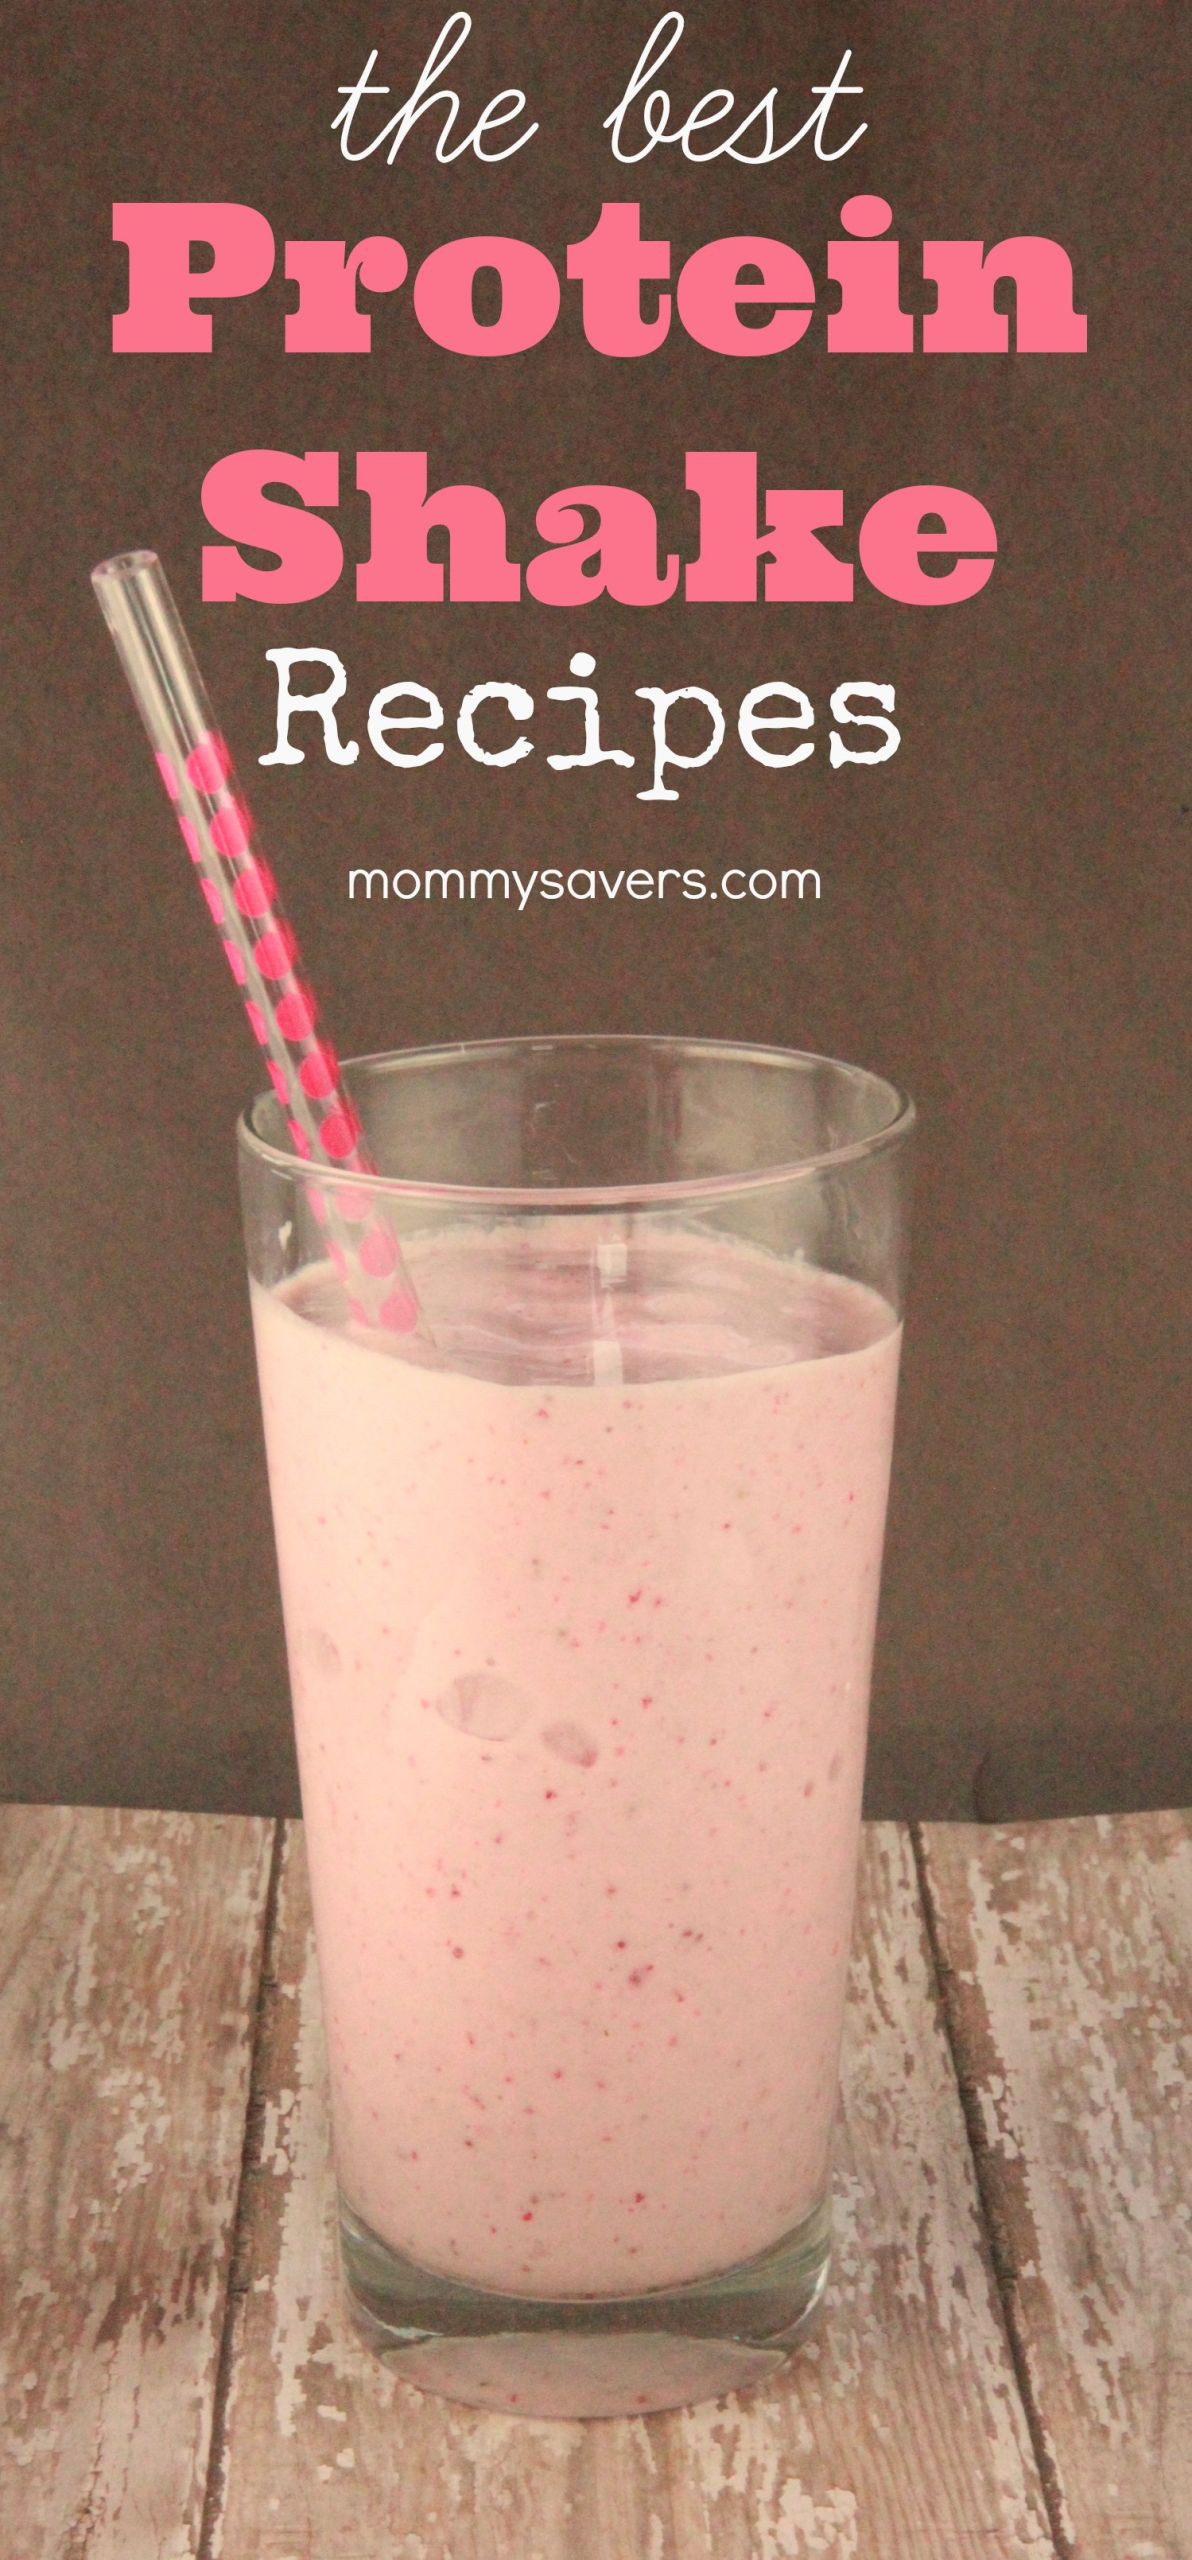 Whey Protein Shake Recipes For Weight Loss
 Best Protein Shake Recipes Mommysavers